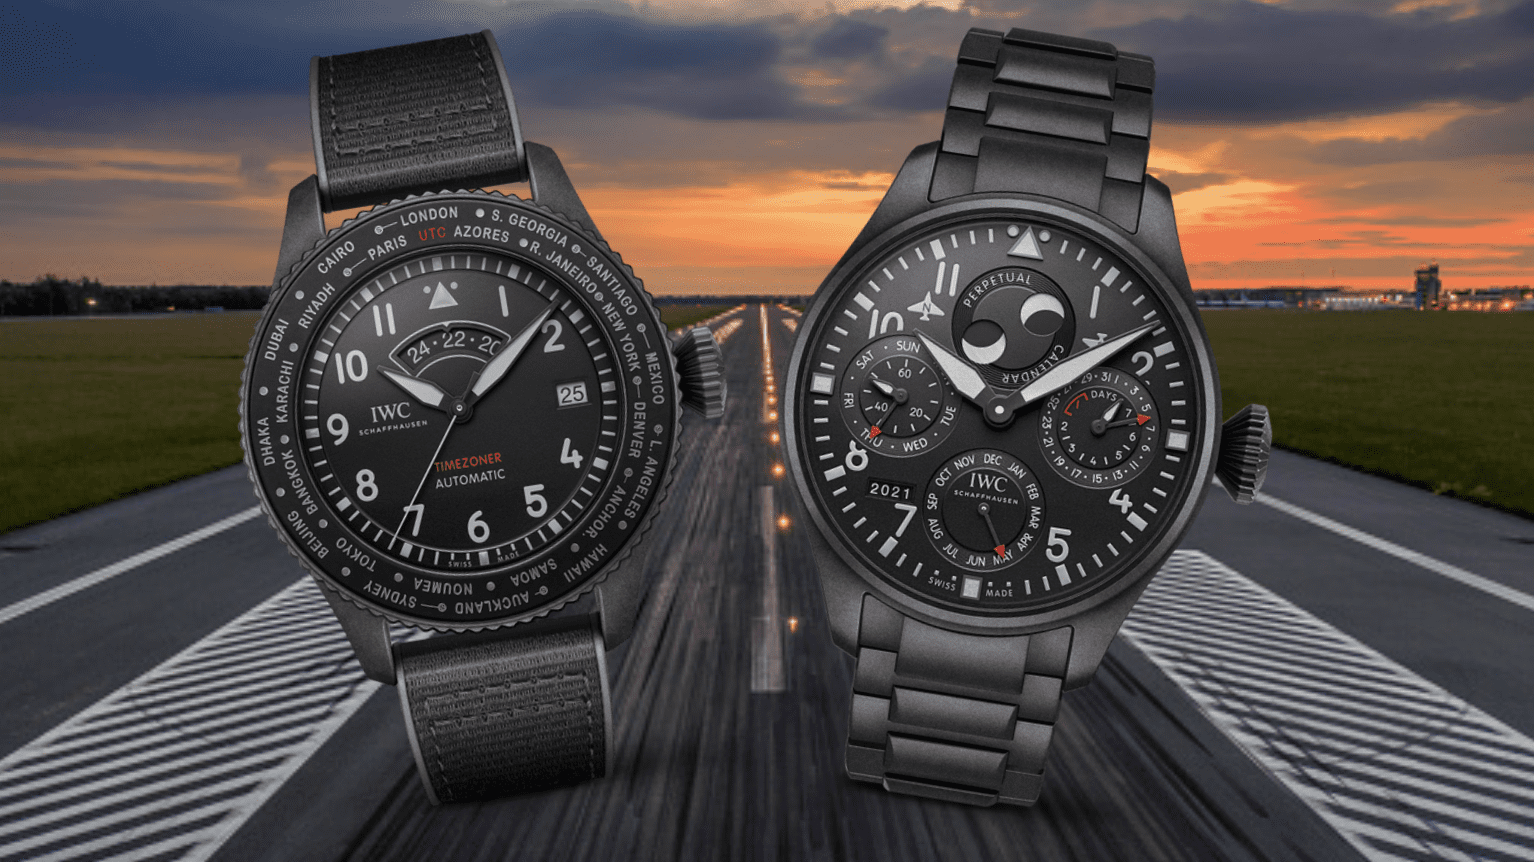 VIDEO: IWC introduces two new stealth Top Gun Ceratanium Pilot’s watches